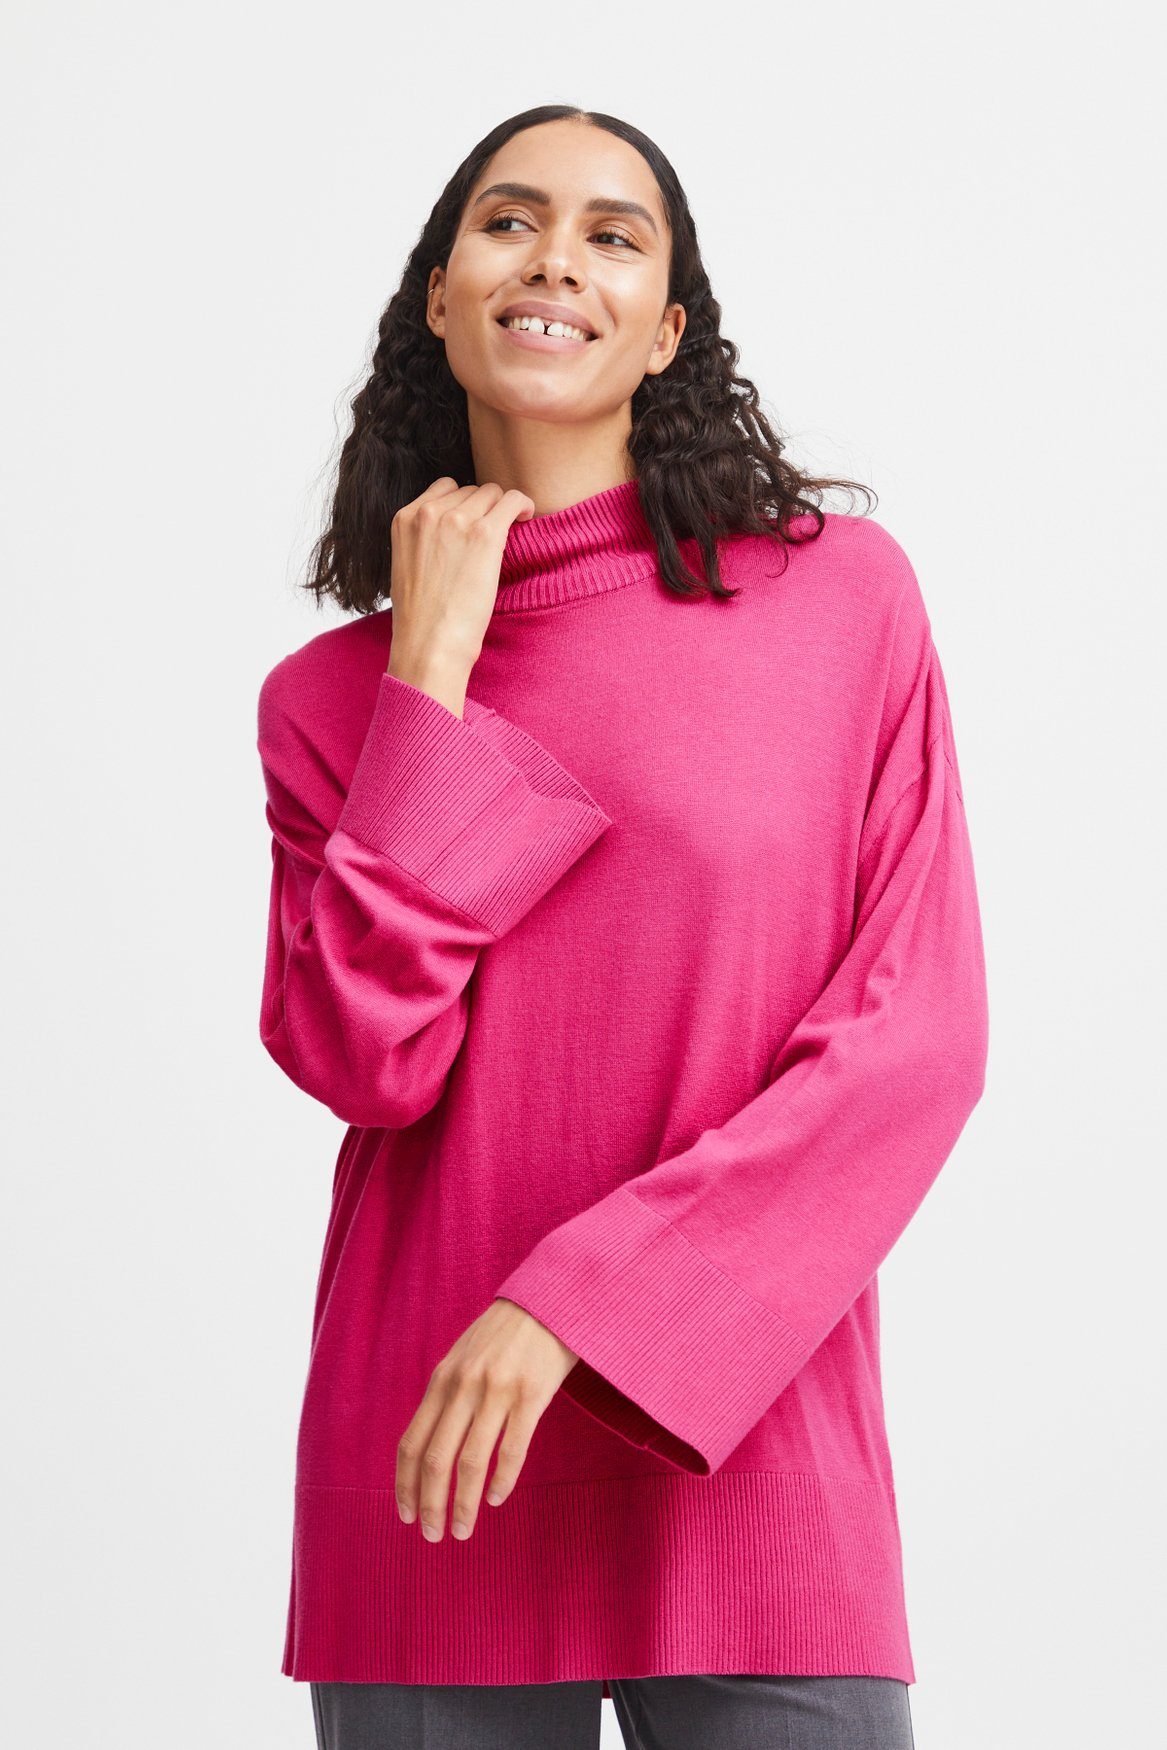 b.young Strickpullover Feinstrick Pullover Langarm Shirt BYMMPIMBA1 6263 in Pink